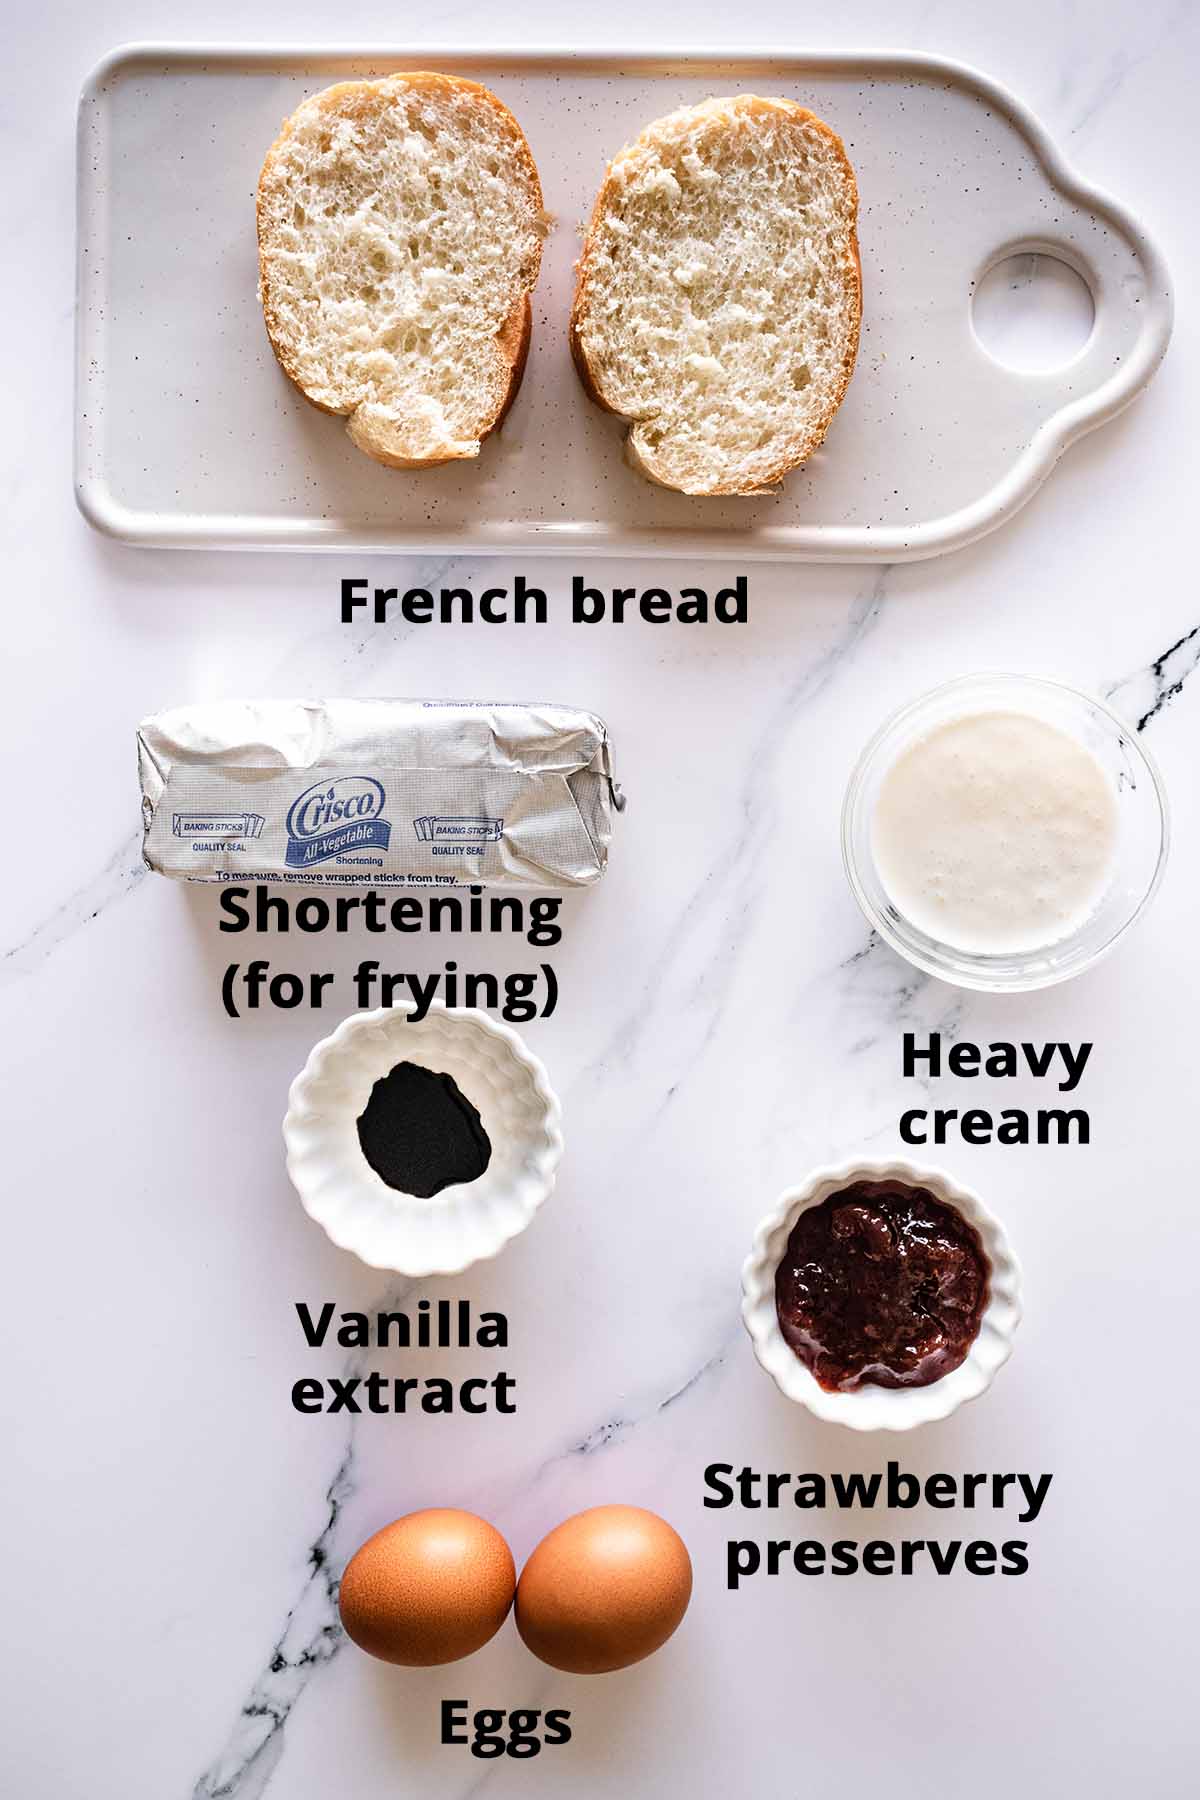 Deep fried French toast ingredients